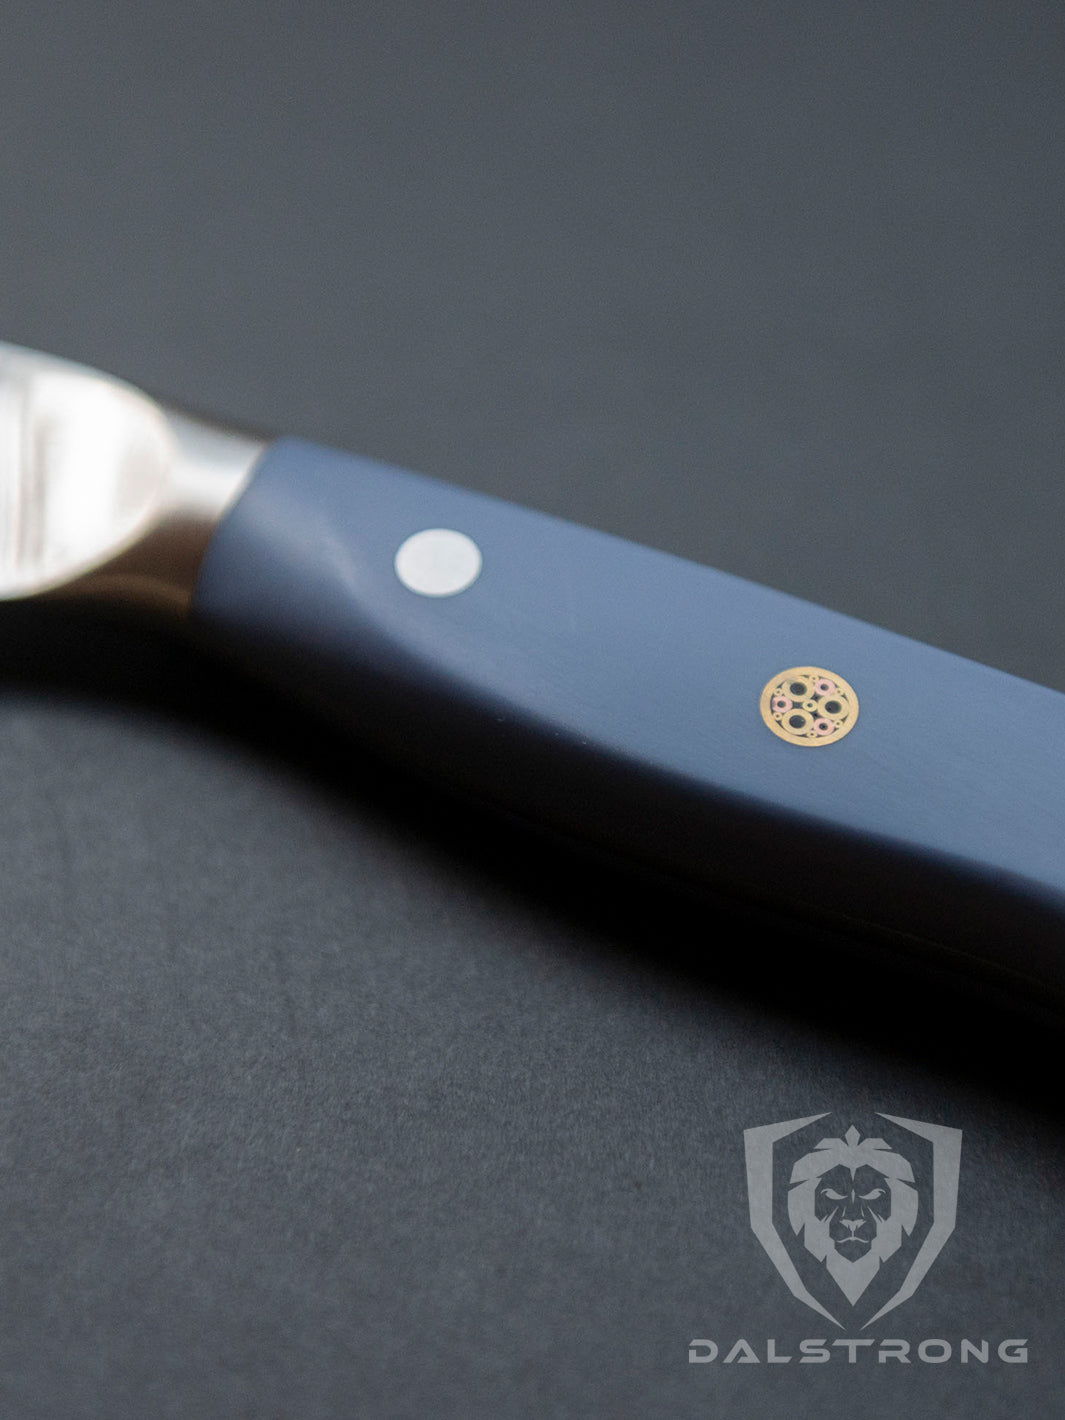 Dalstrong shogun series 8 inch chef knife with light blue matte handle on top of a solid surface.